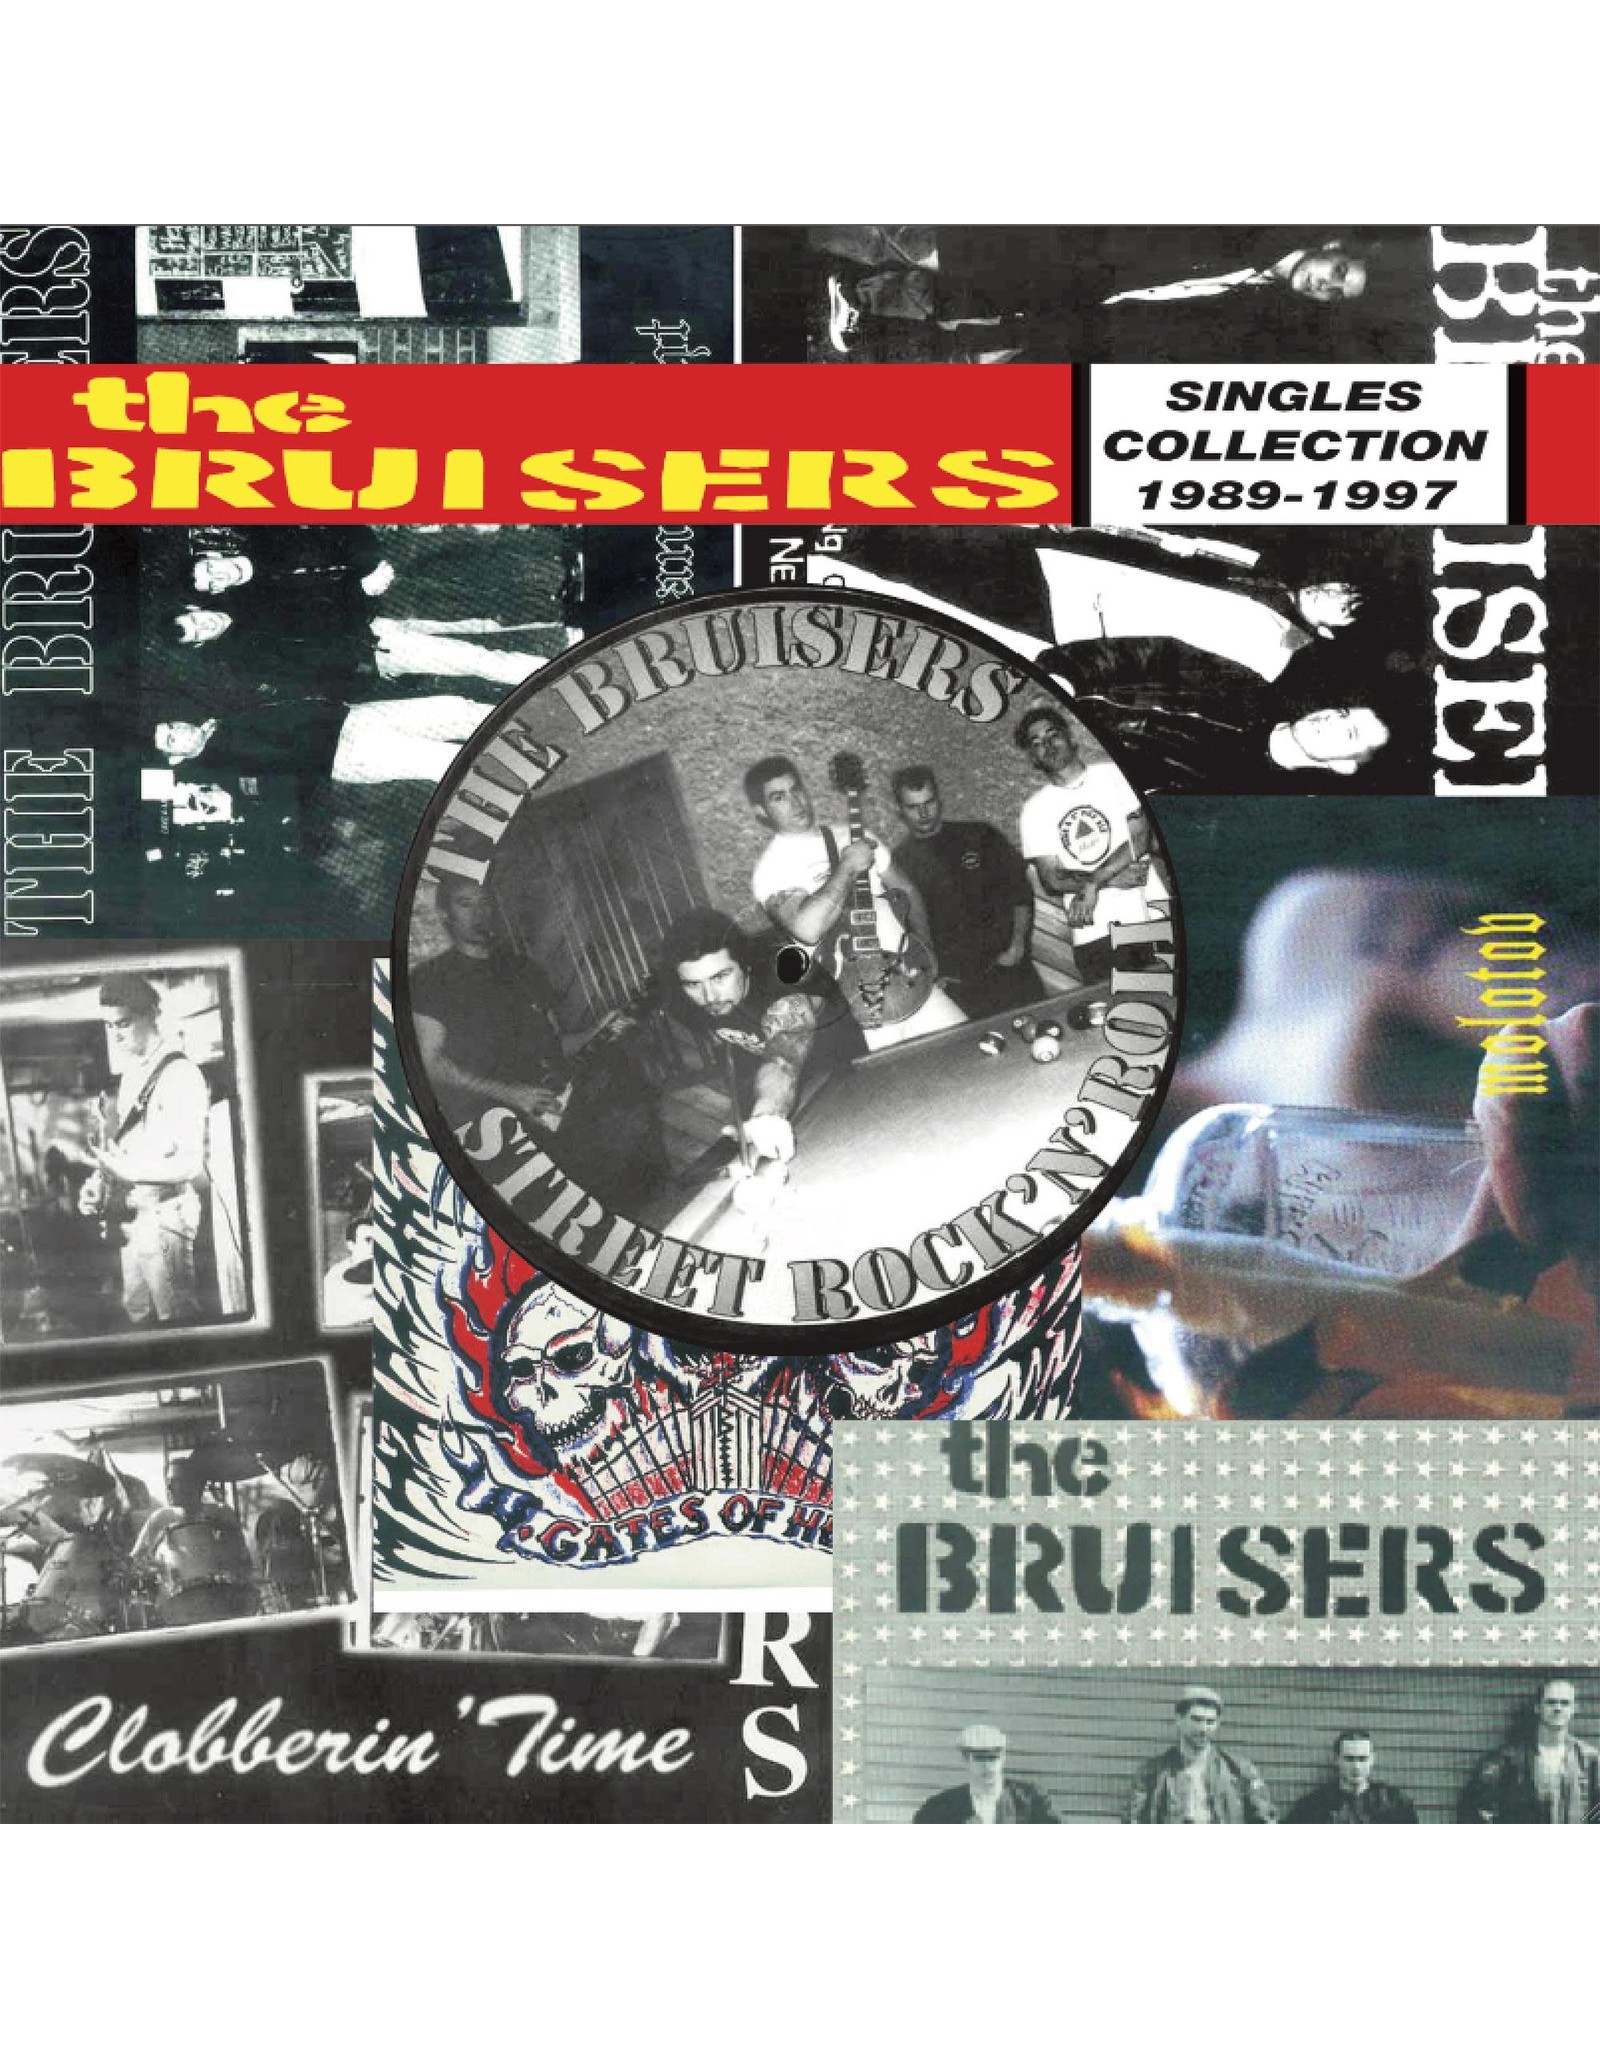 Bruisers - Singles Collection 1989-1997 LP (RSD '21 Exclusive)